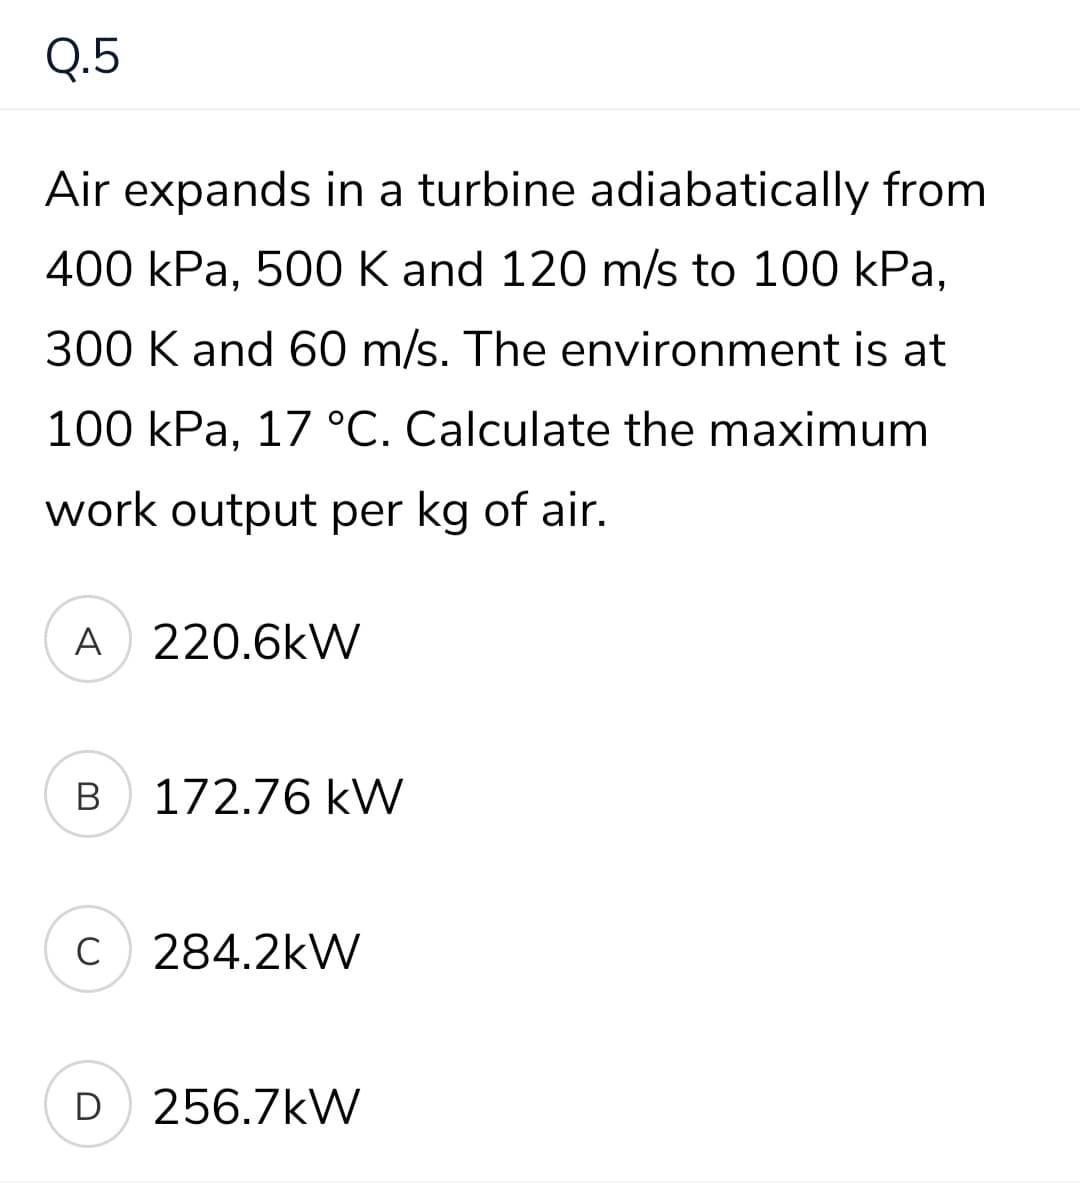 Q.5
Air expands in a turbine adiabatically from
400 kPа, 50О К and 120 m/s to 100 kPa,
300 K and 60 m/s. The environment is at
100 kPa, 17 °C. Calculate the maximum
work output per kg of air.
A 220.6kW
В
172.76 kW
C
284.2kW
D
256.7kW
